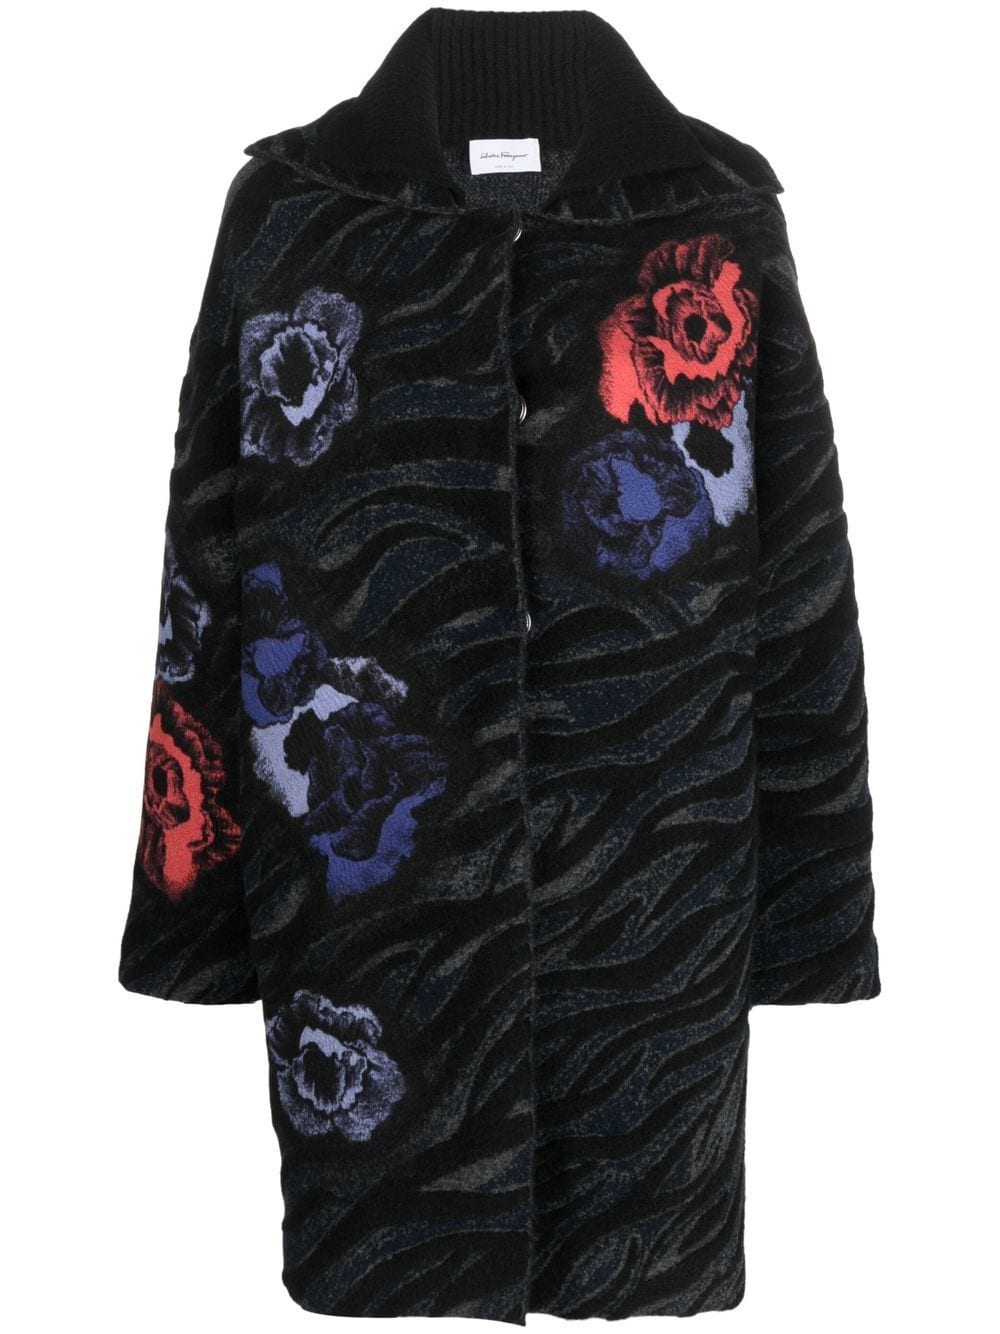 Ferragamo floral-embroidered knitted cardigan-coat - Black